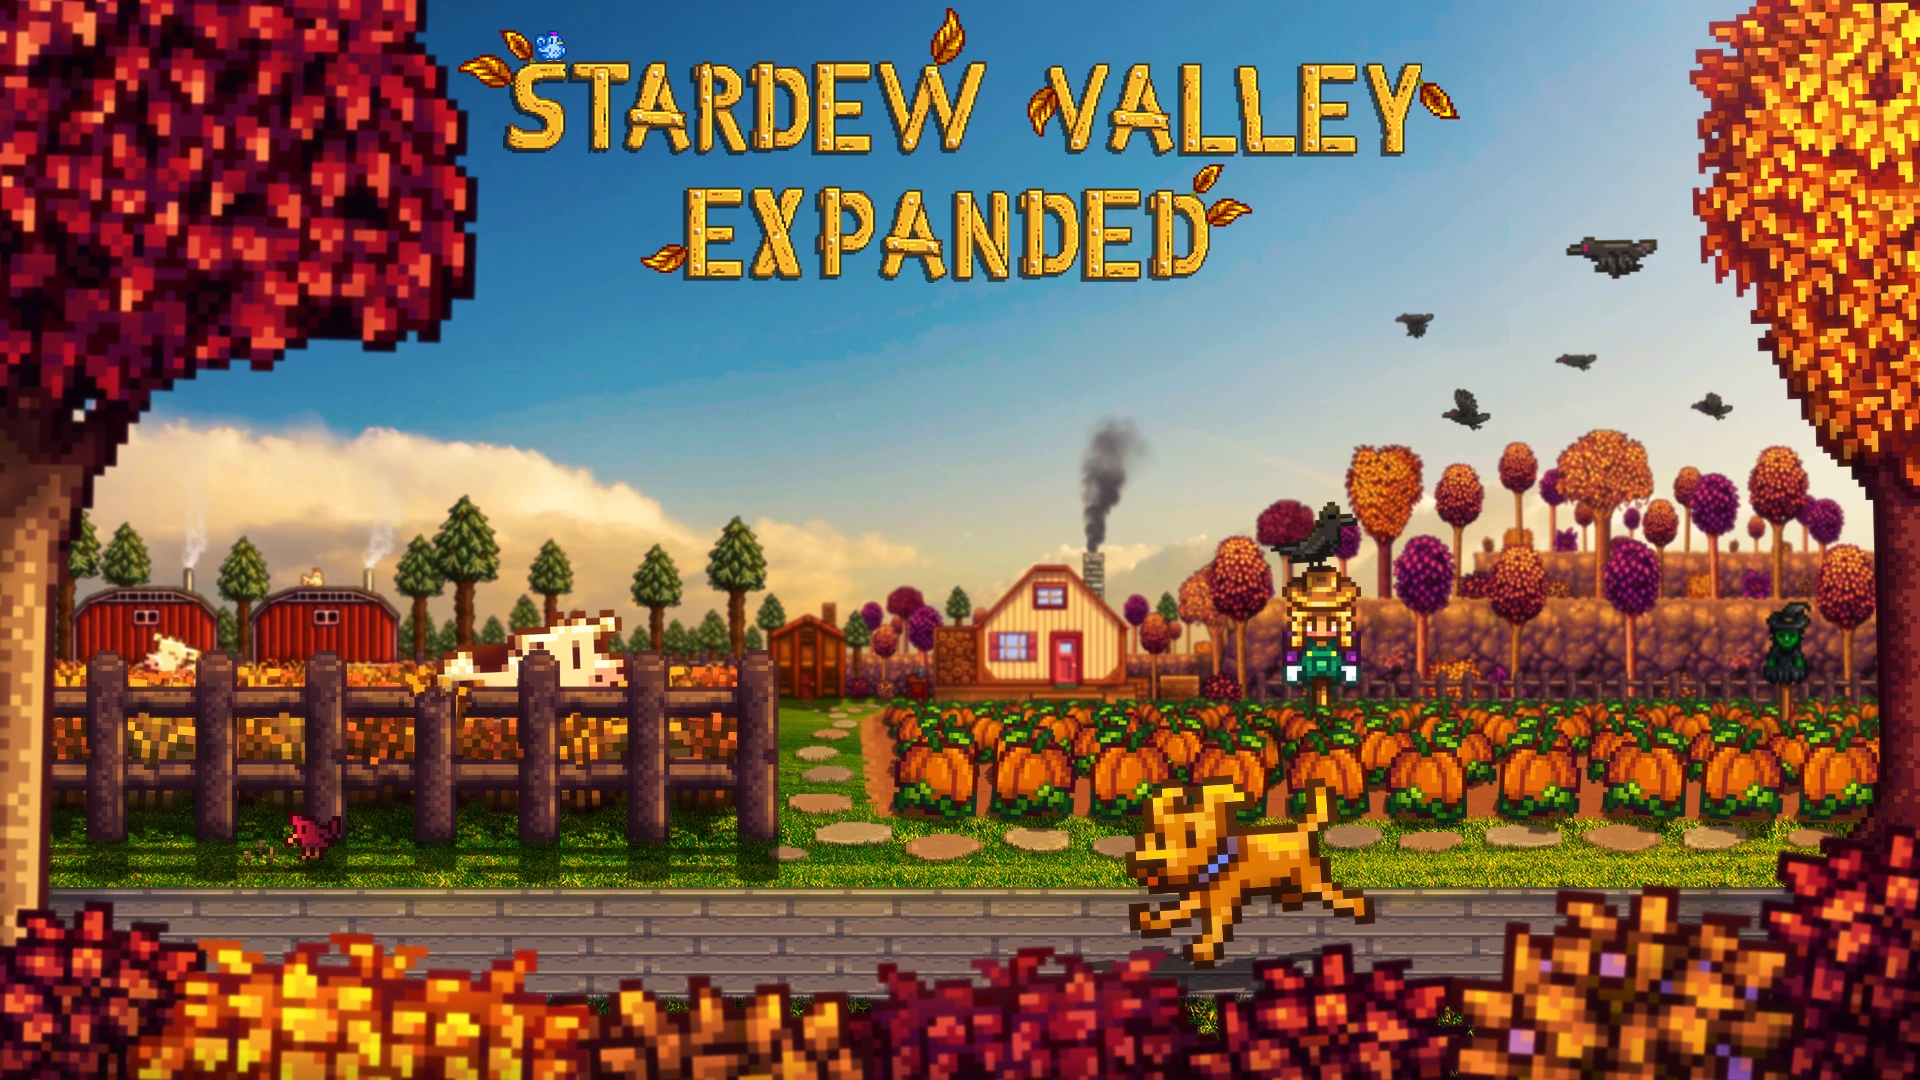 Stardew Valley Expanded new cover art